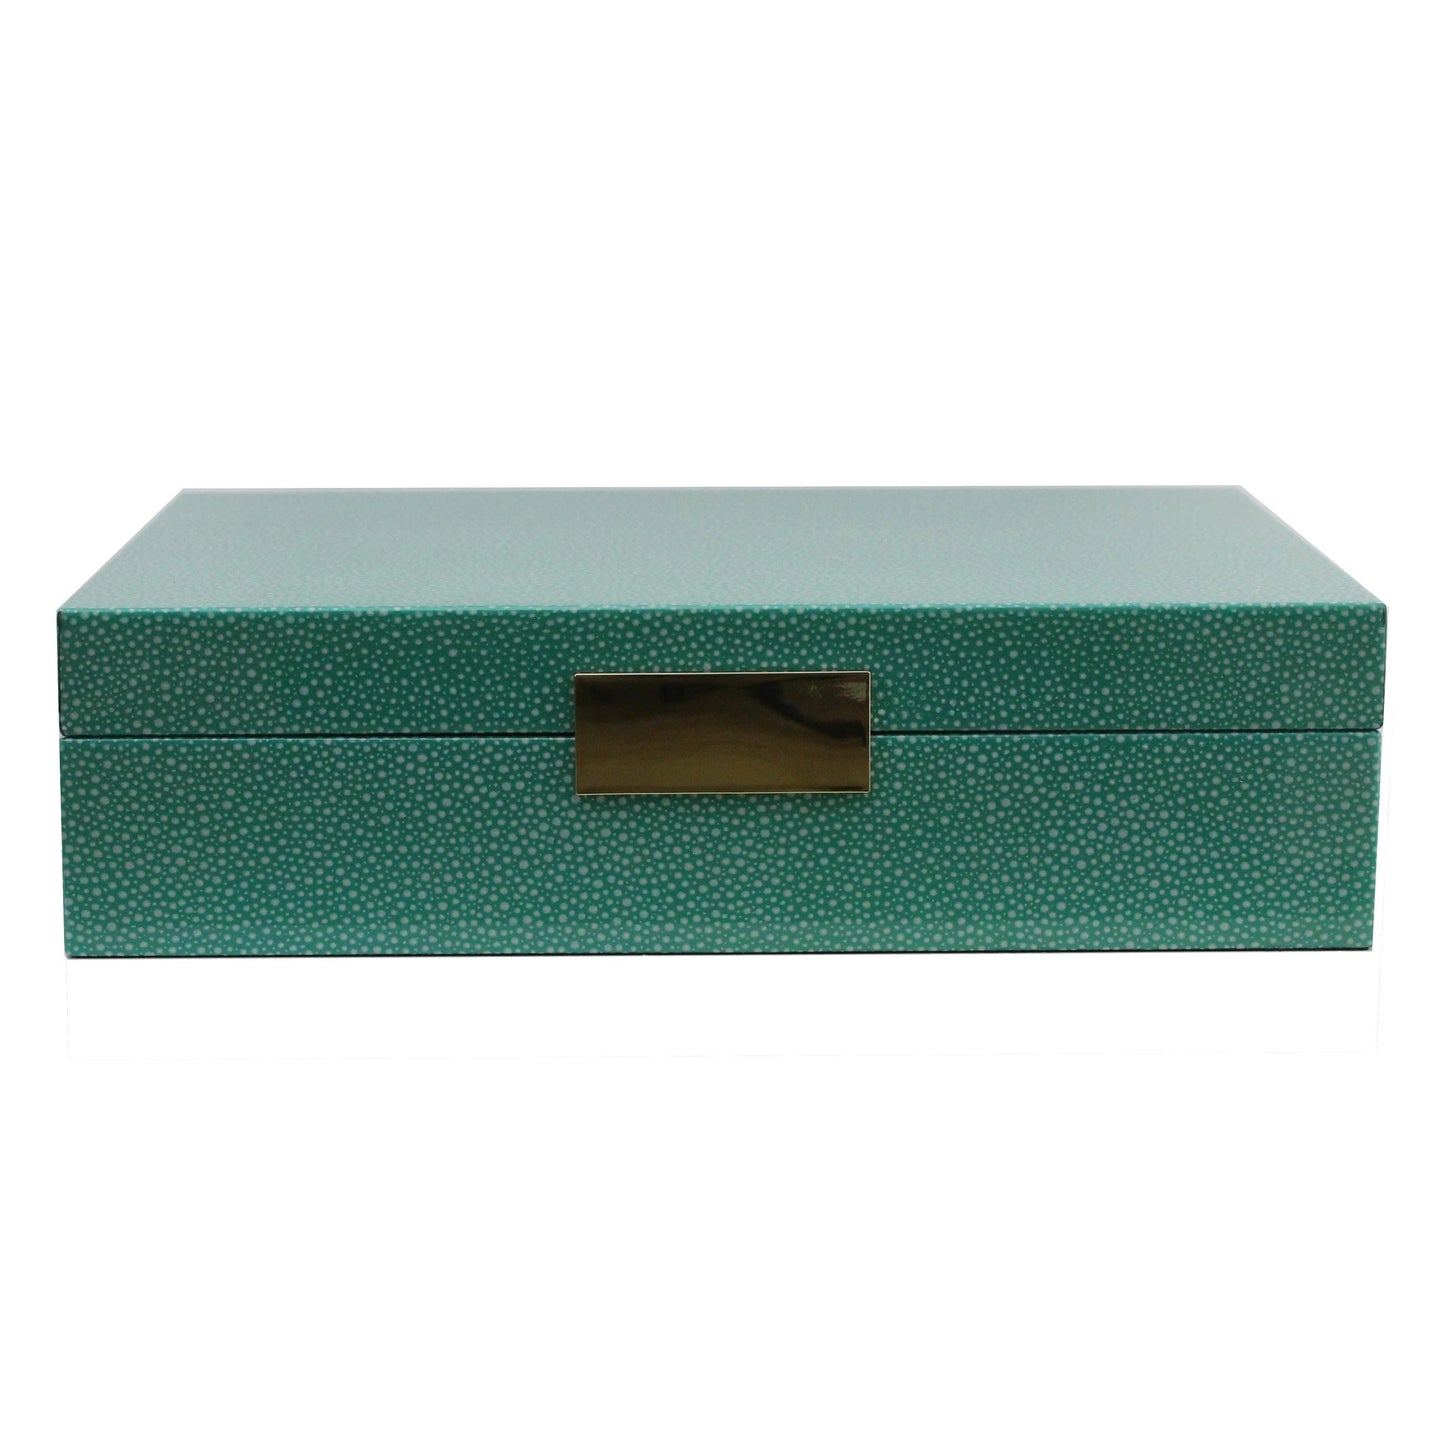 Addison Ross 8x11 Large Shagreen Lacquer Box with Gold by Addison Ross